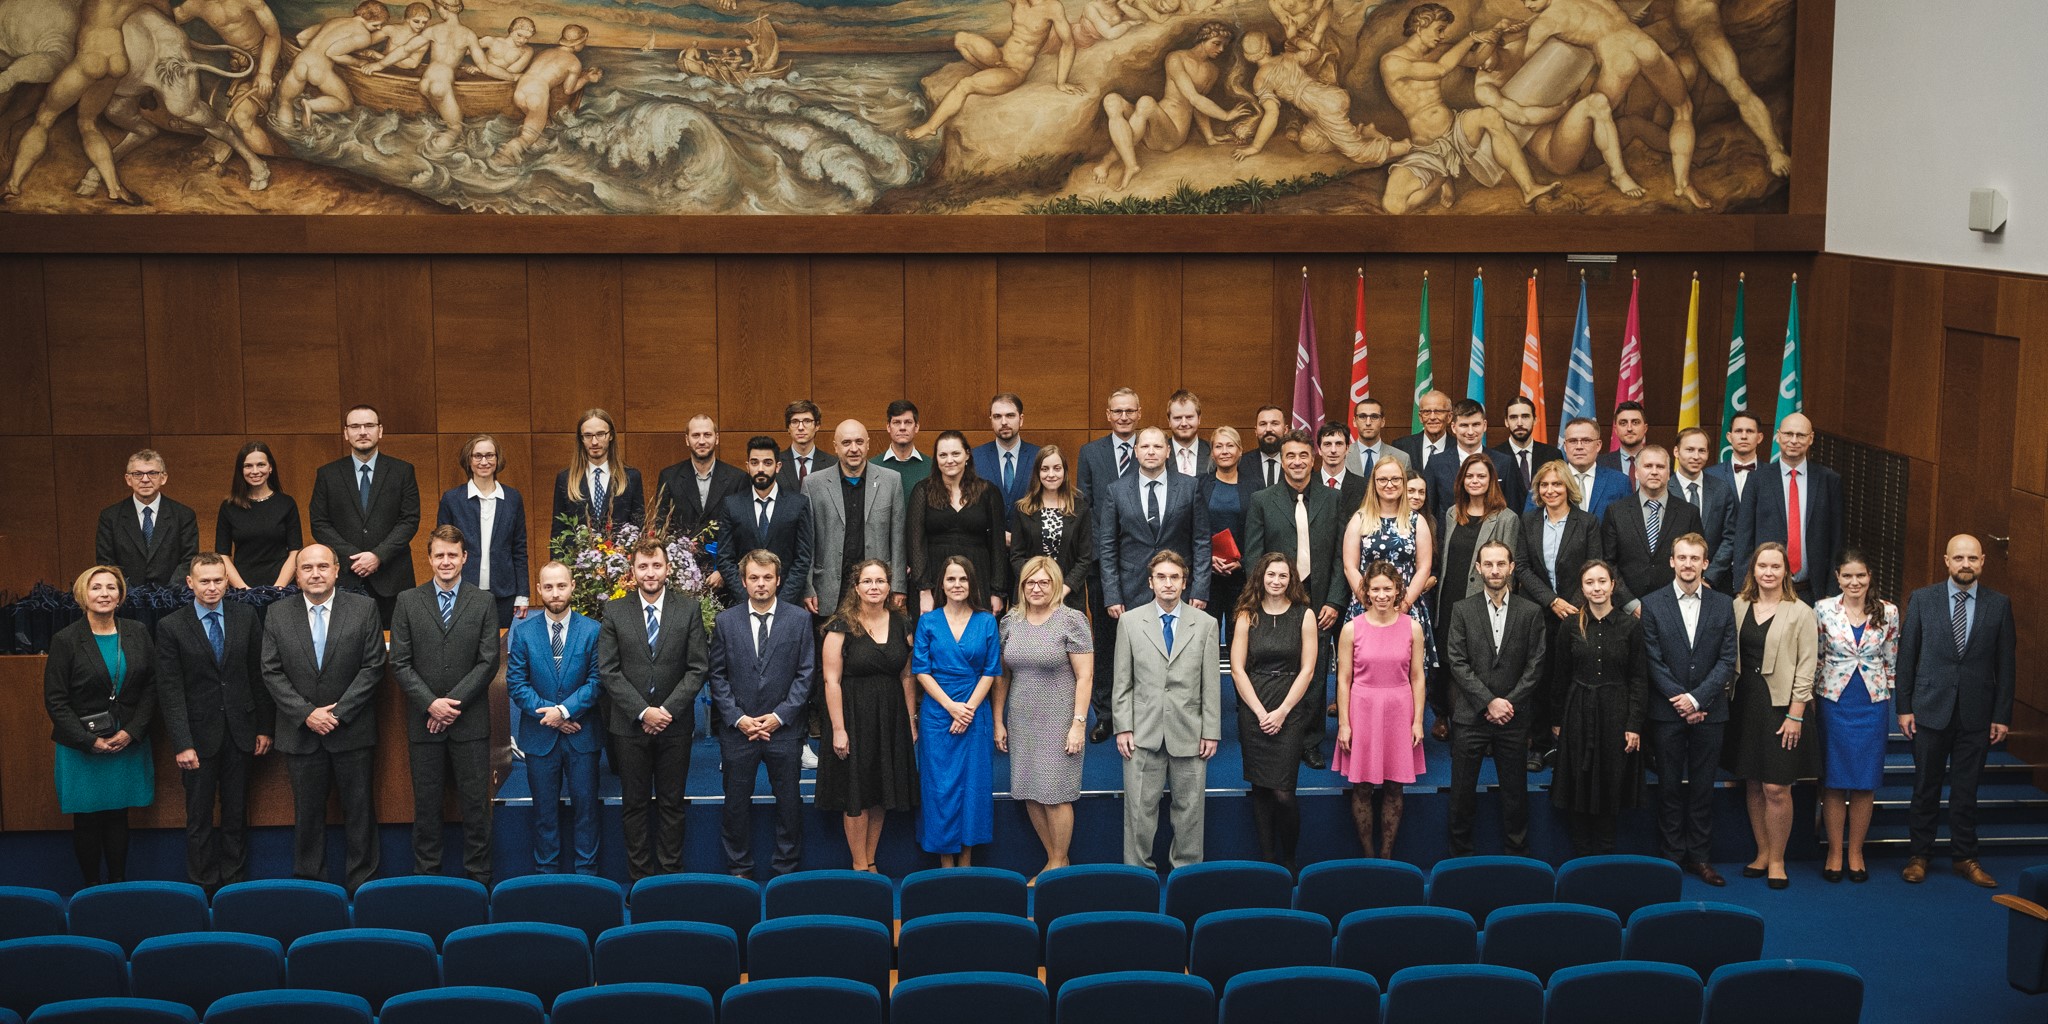 PhD students and their supervisors received awards